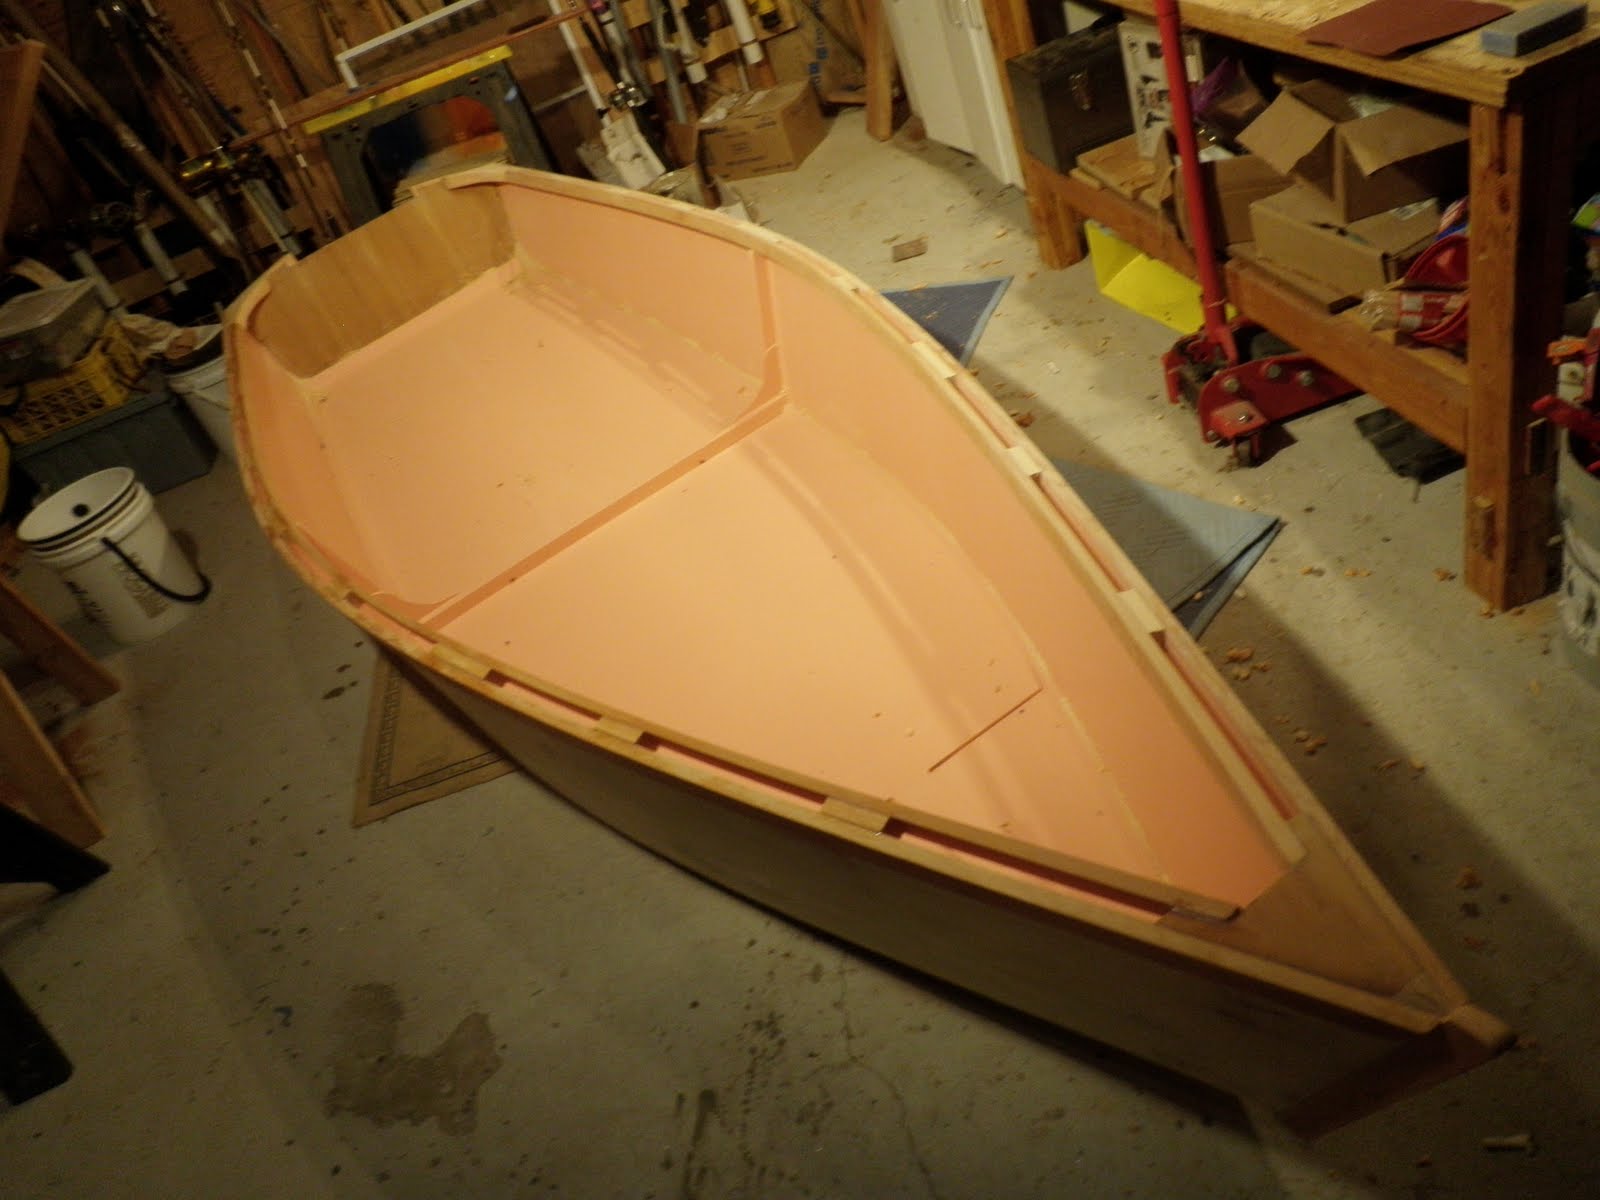  building-a-wooden-jon-boat-with-simple-plans-for-small-plywood-boats